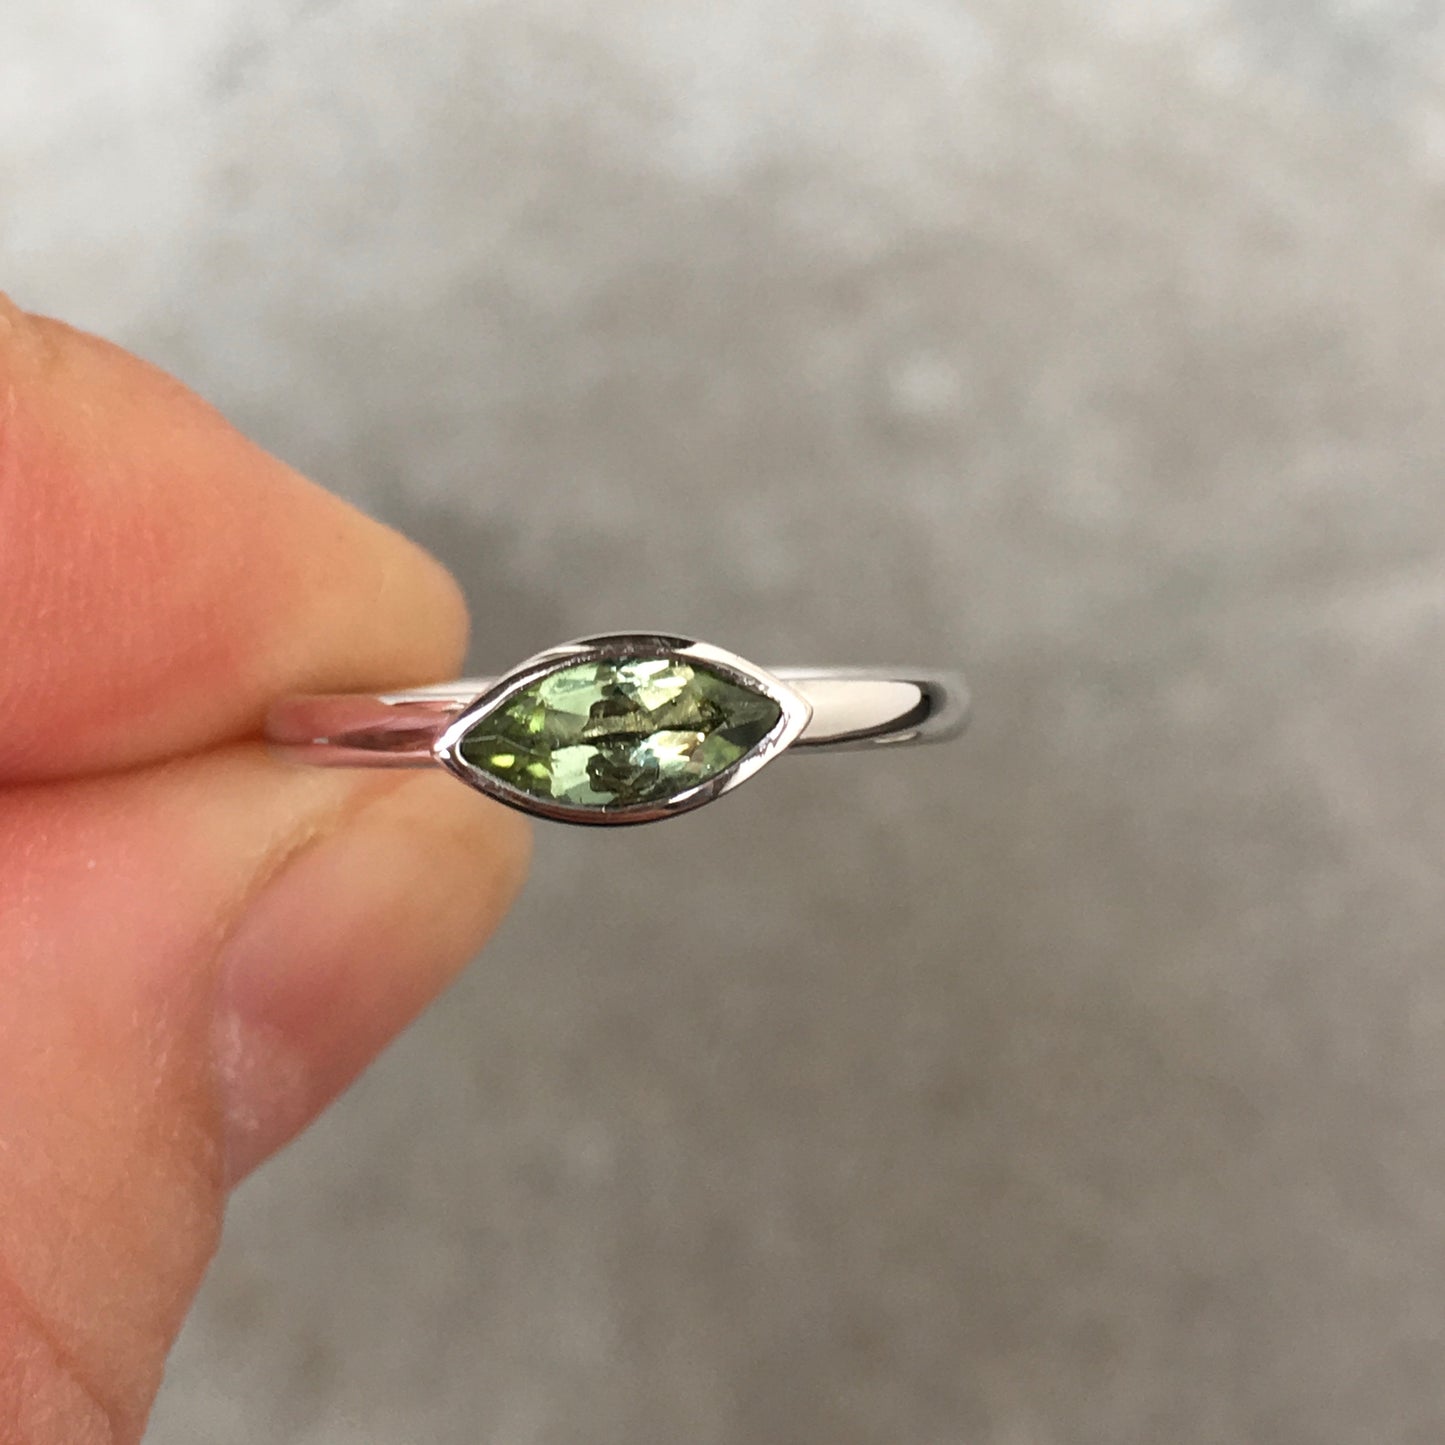 14k white gold ring set with an olive green tourmaline